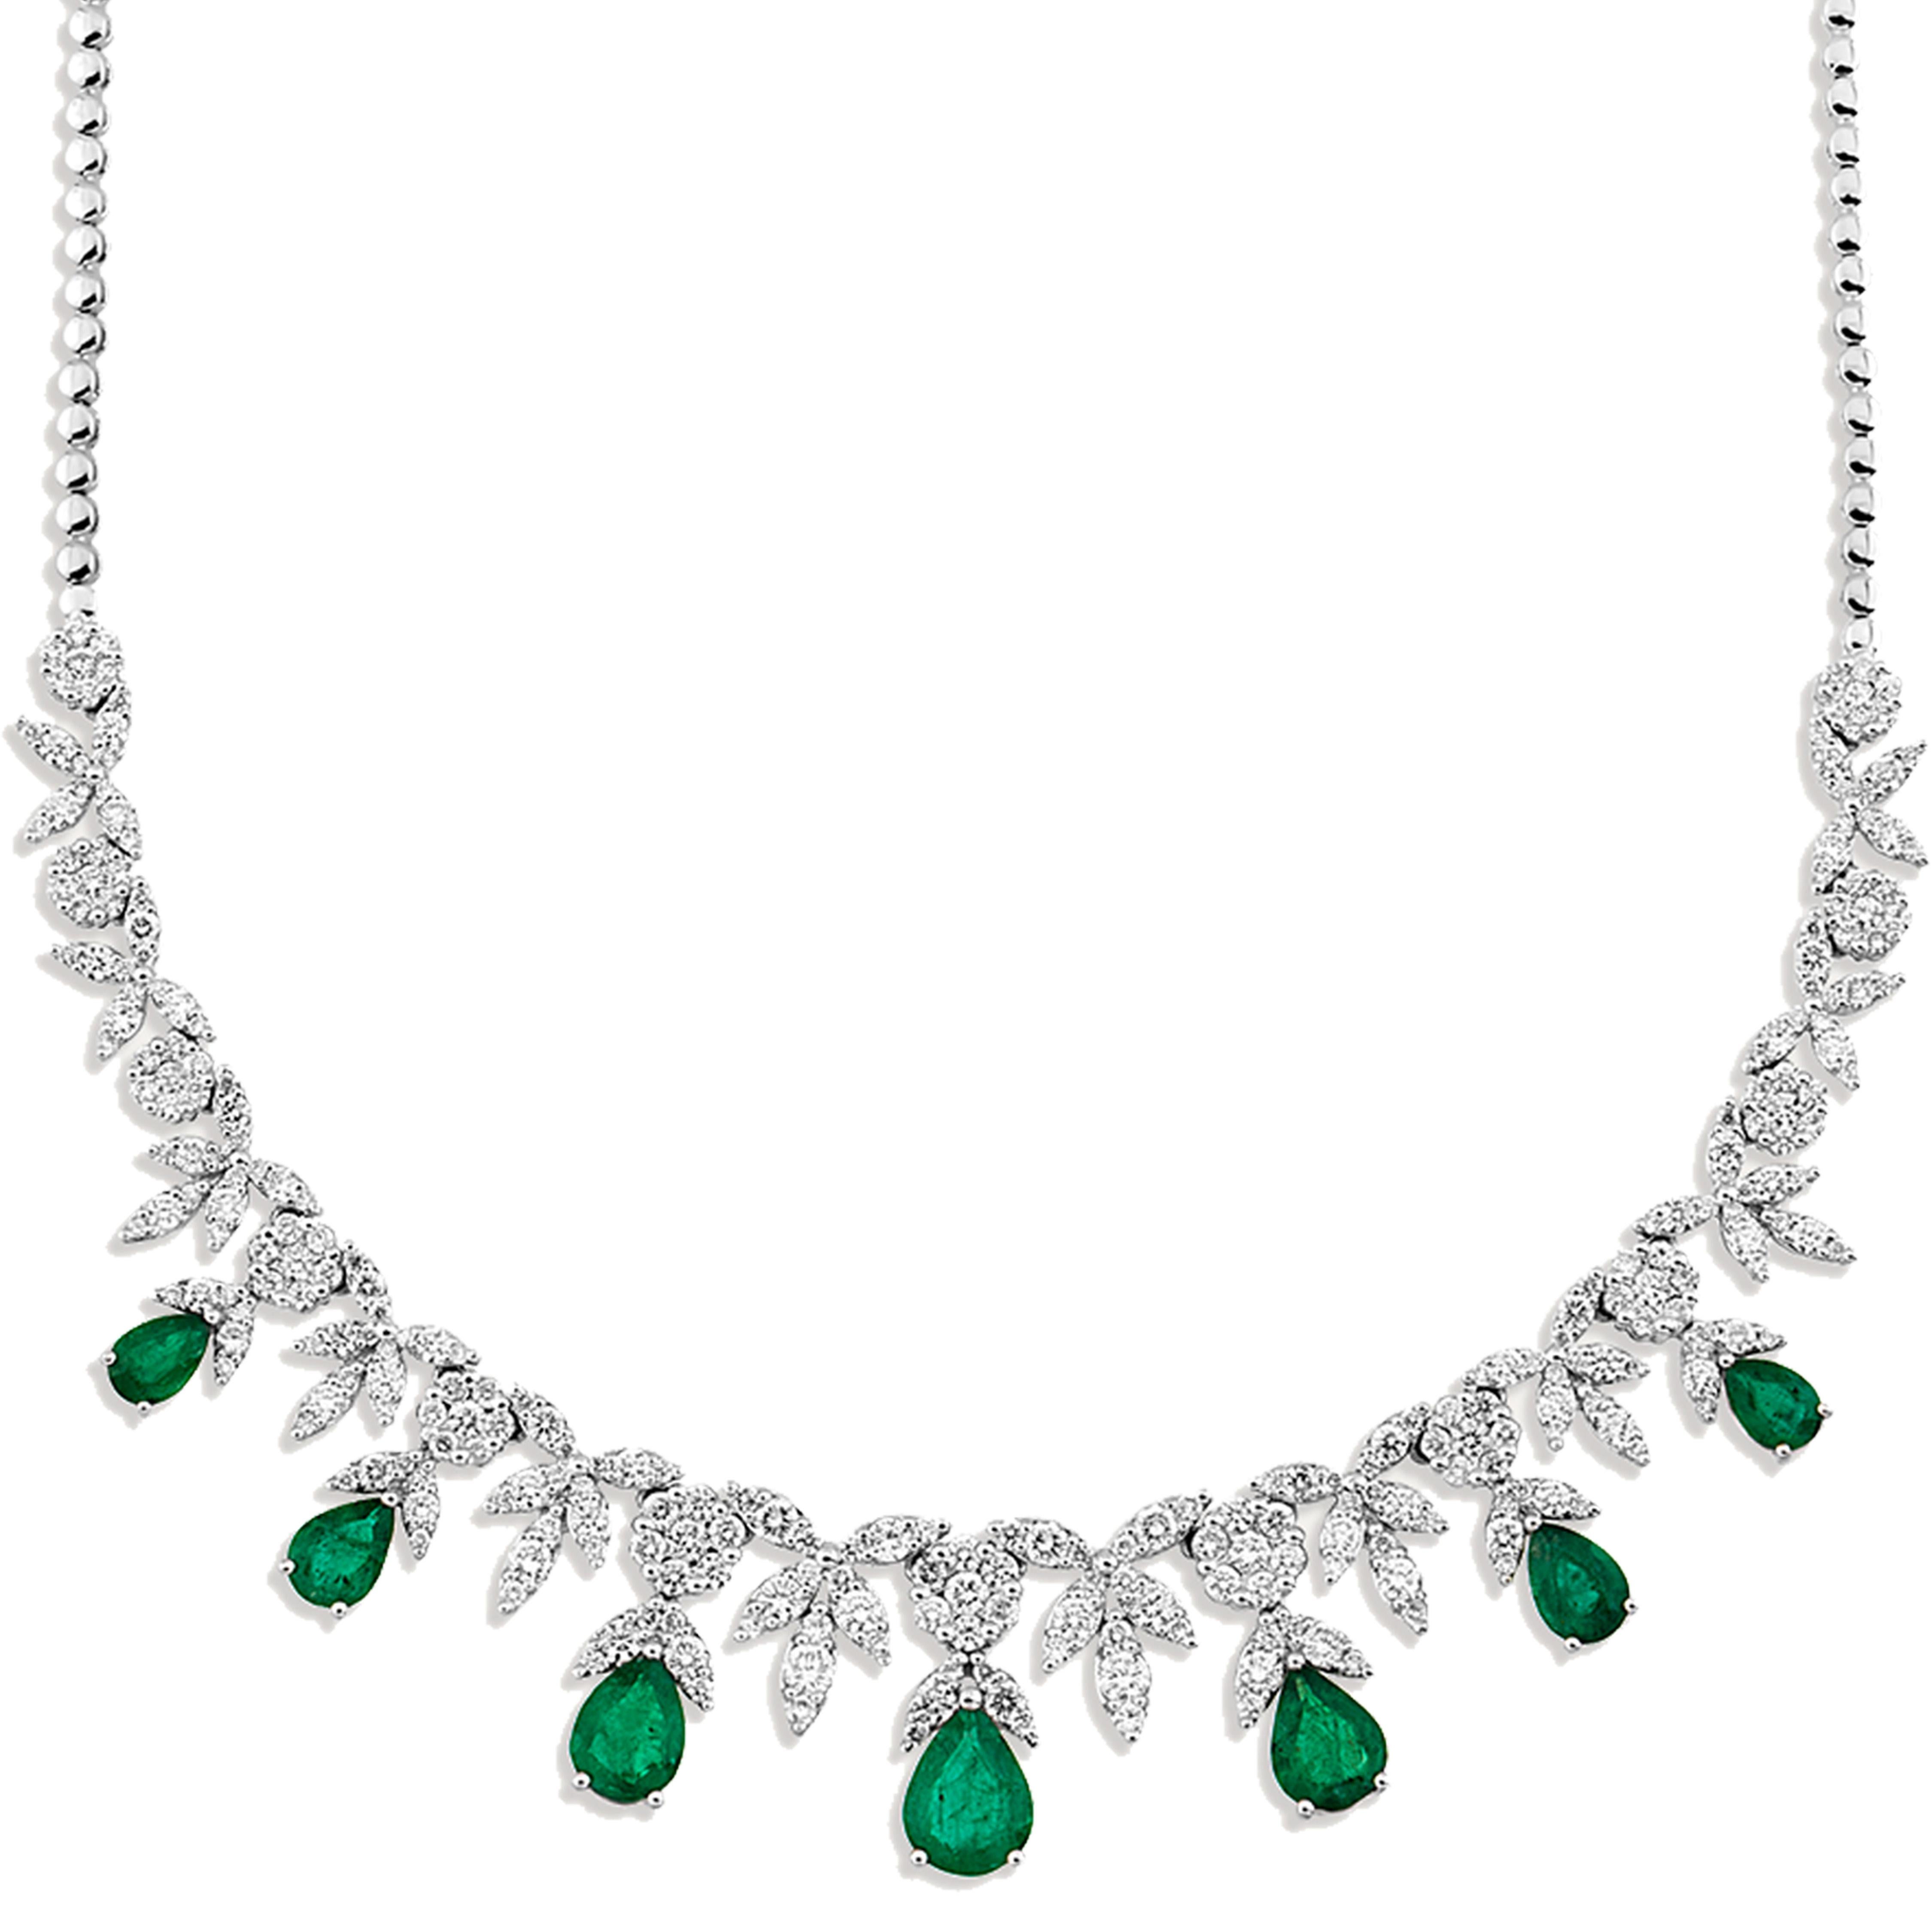 Emerald and Diamond 9.95 Carat Necklace in 18K White Gold In New Condition For Sale In New York, NY